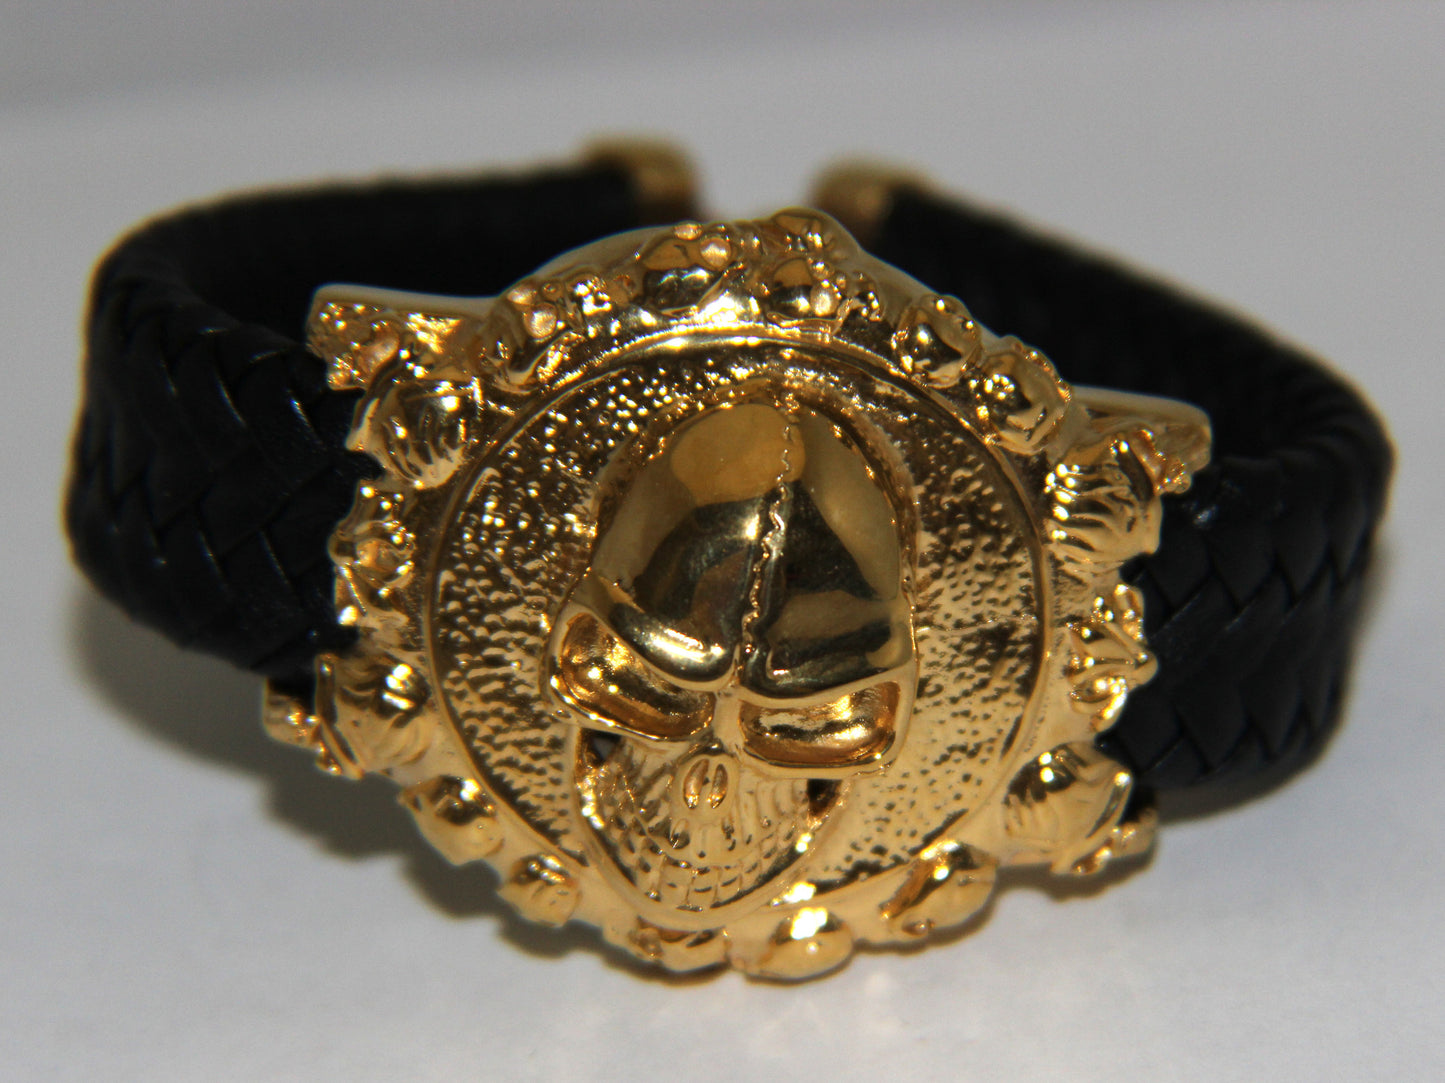 Stainless Steel Yellow Gold Plated Large Skull Leather Bracelet - UDINC0440